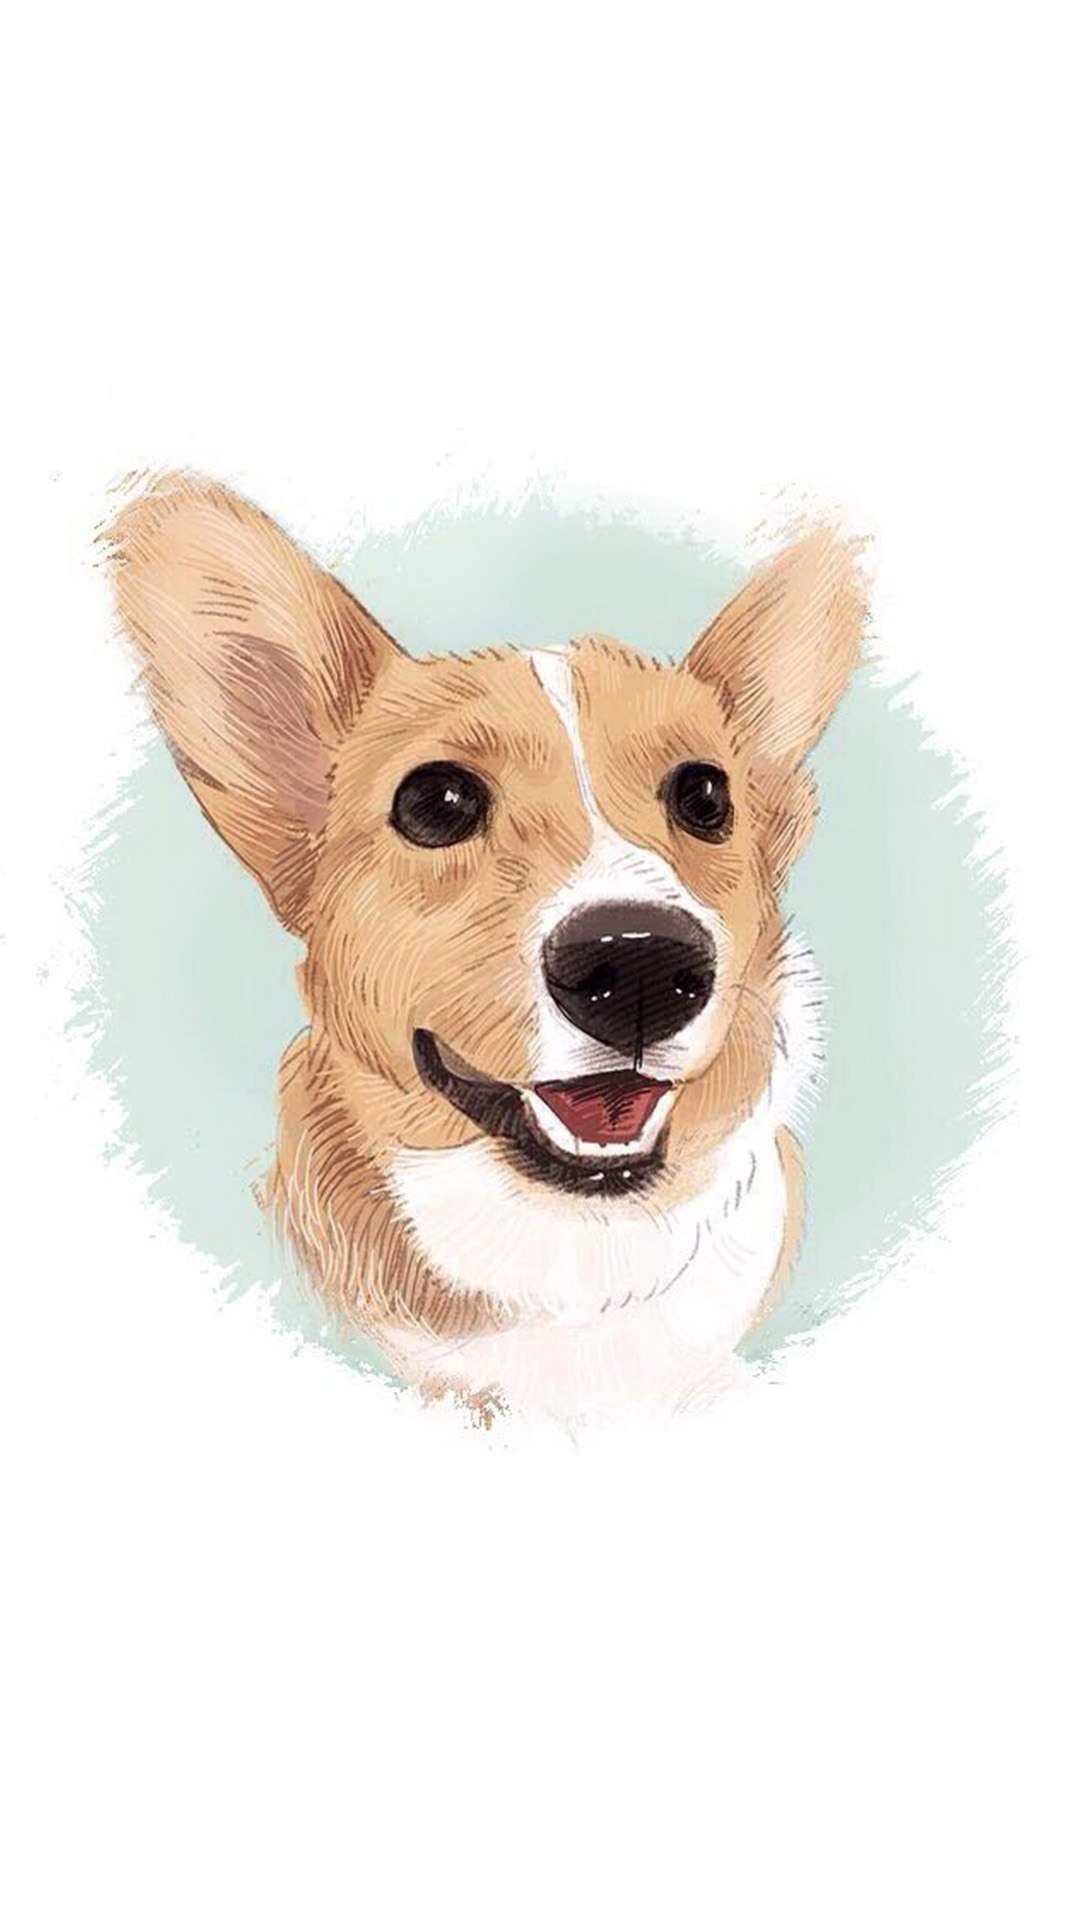 WE MISSED TEDDY SO MUCH. DID U CROSS THE BRIDGE AND DROP SOME SURPRISE FOR US. A. Corgi wallpaper, Dog wallpaper, Corgi wallpaper iphone